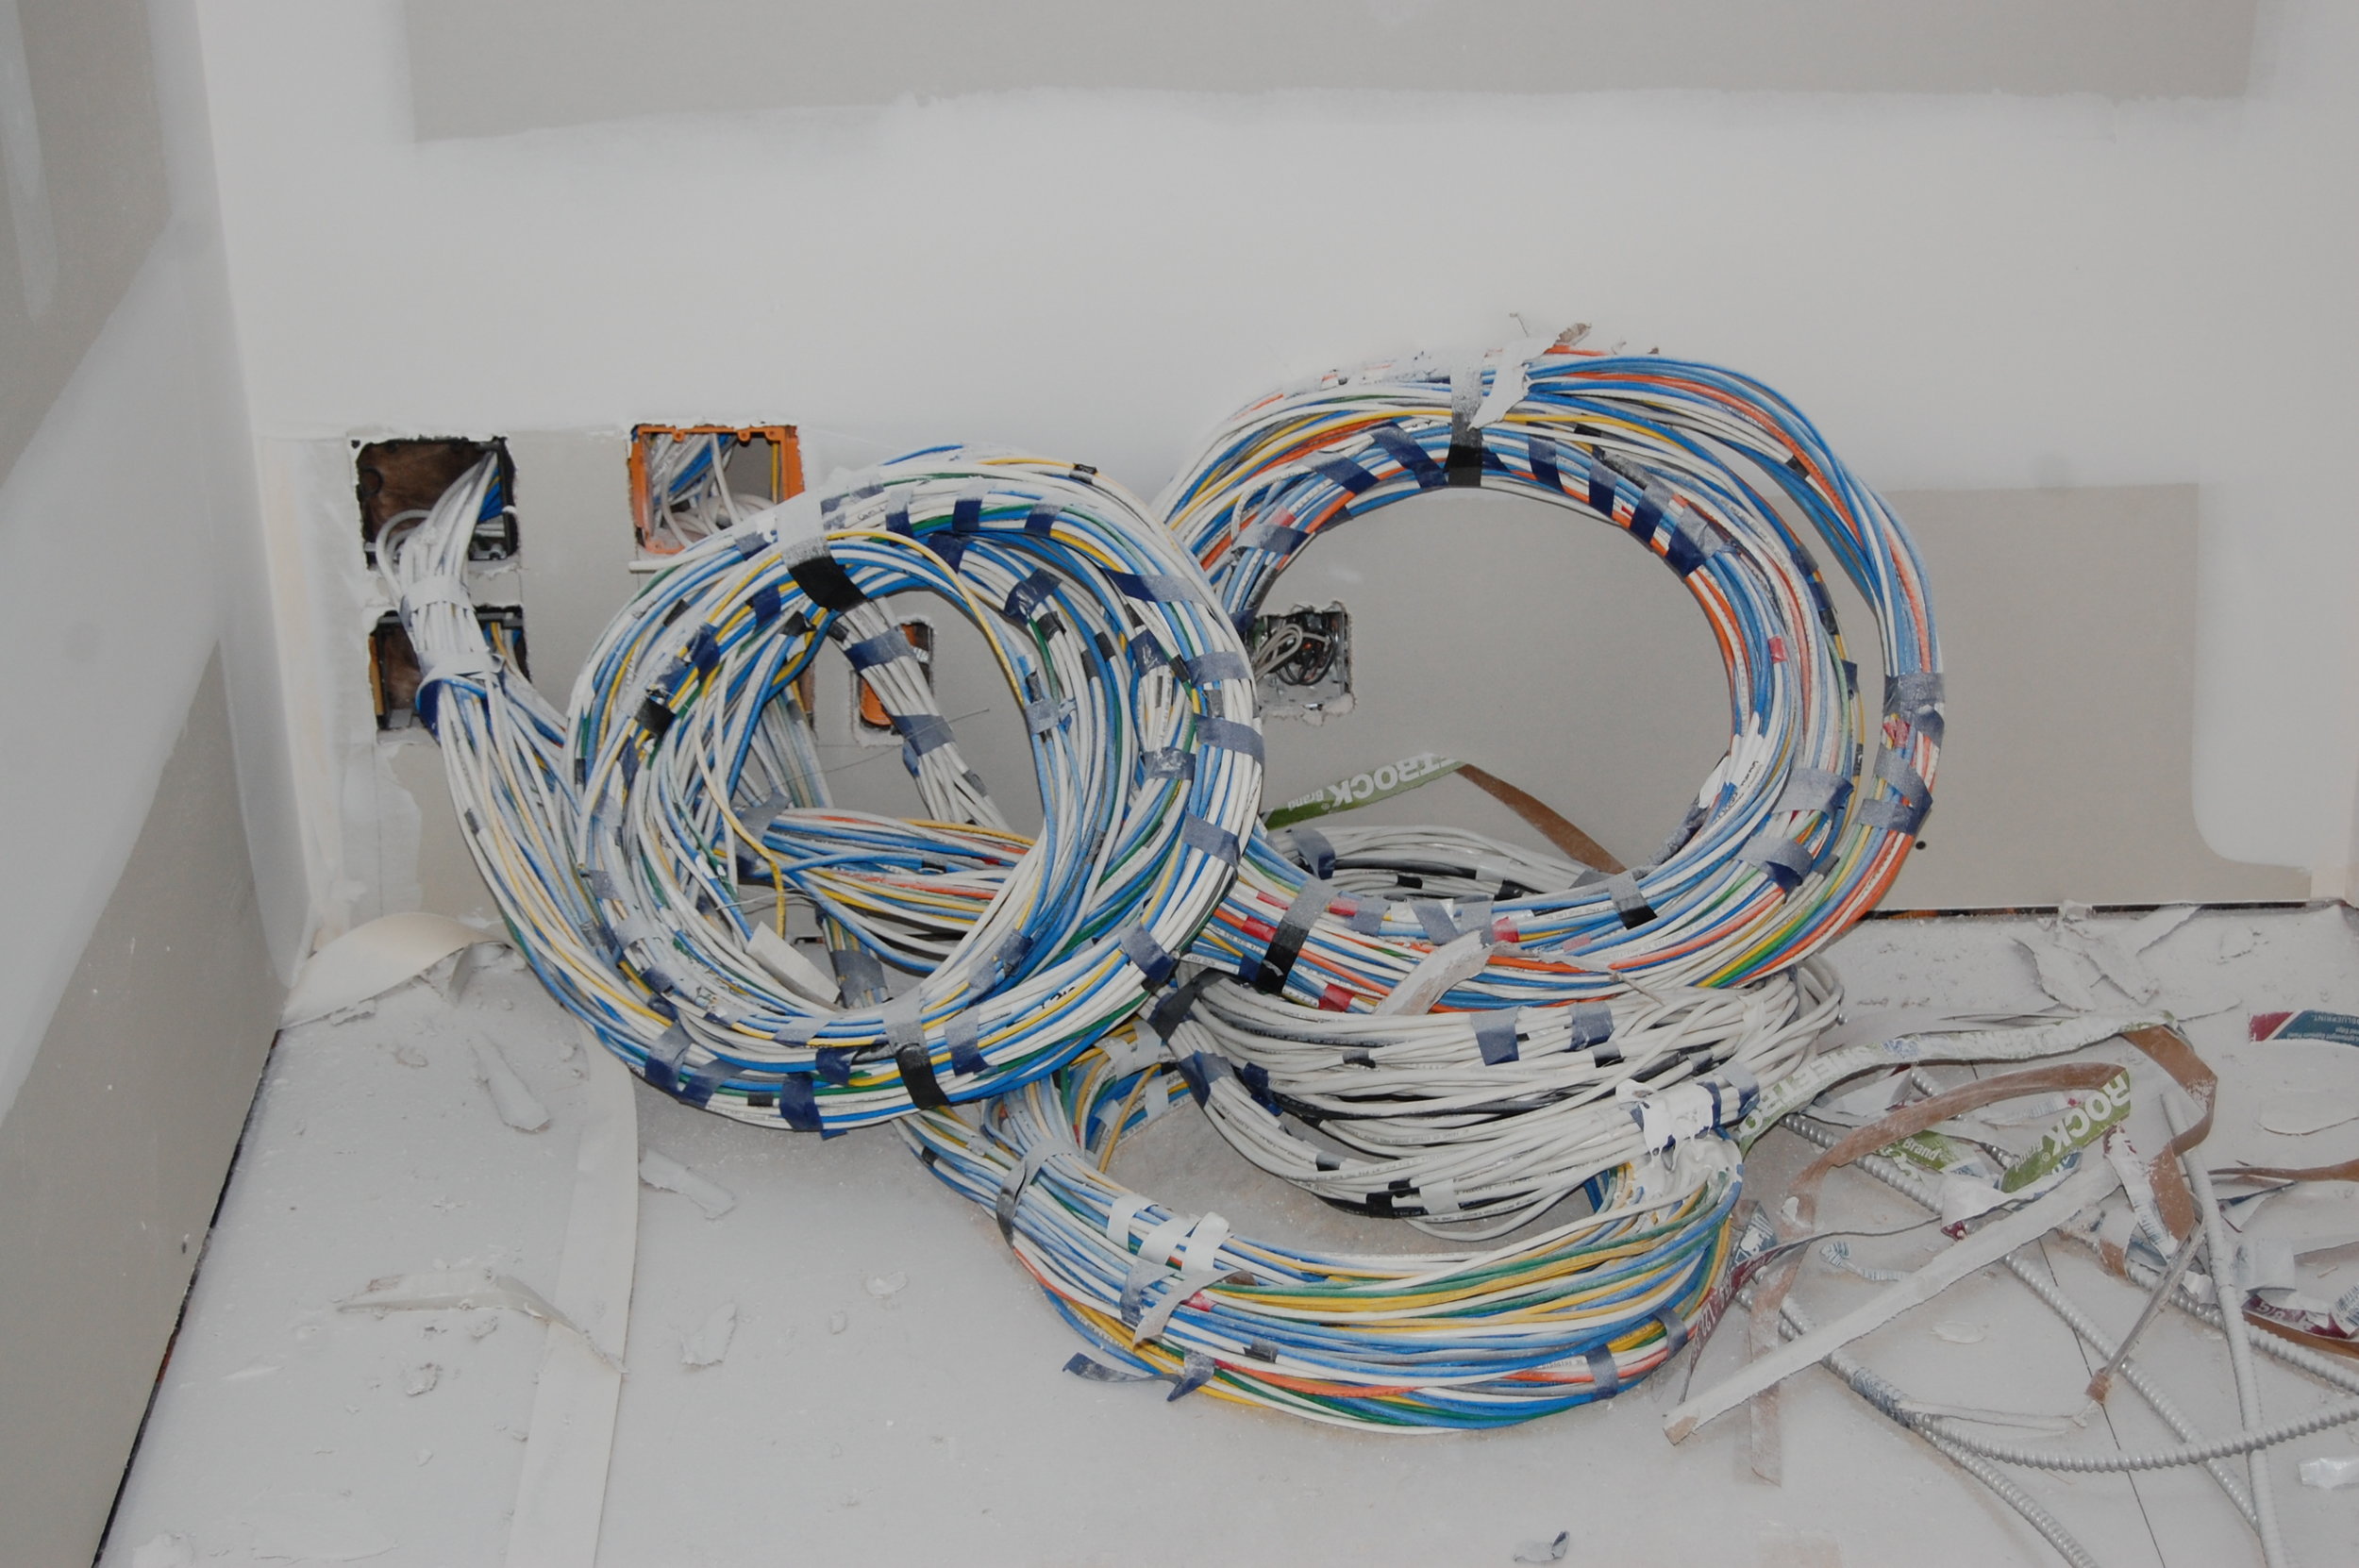 Nope! A mile of wires for all the electronics